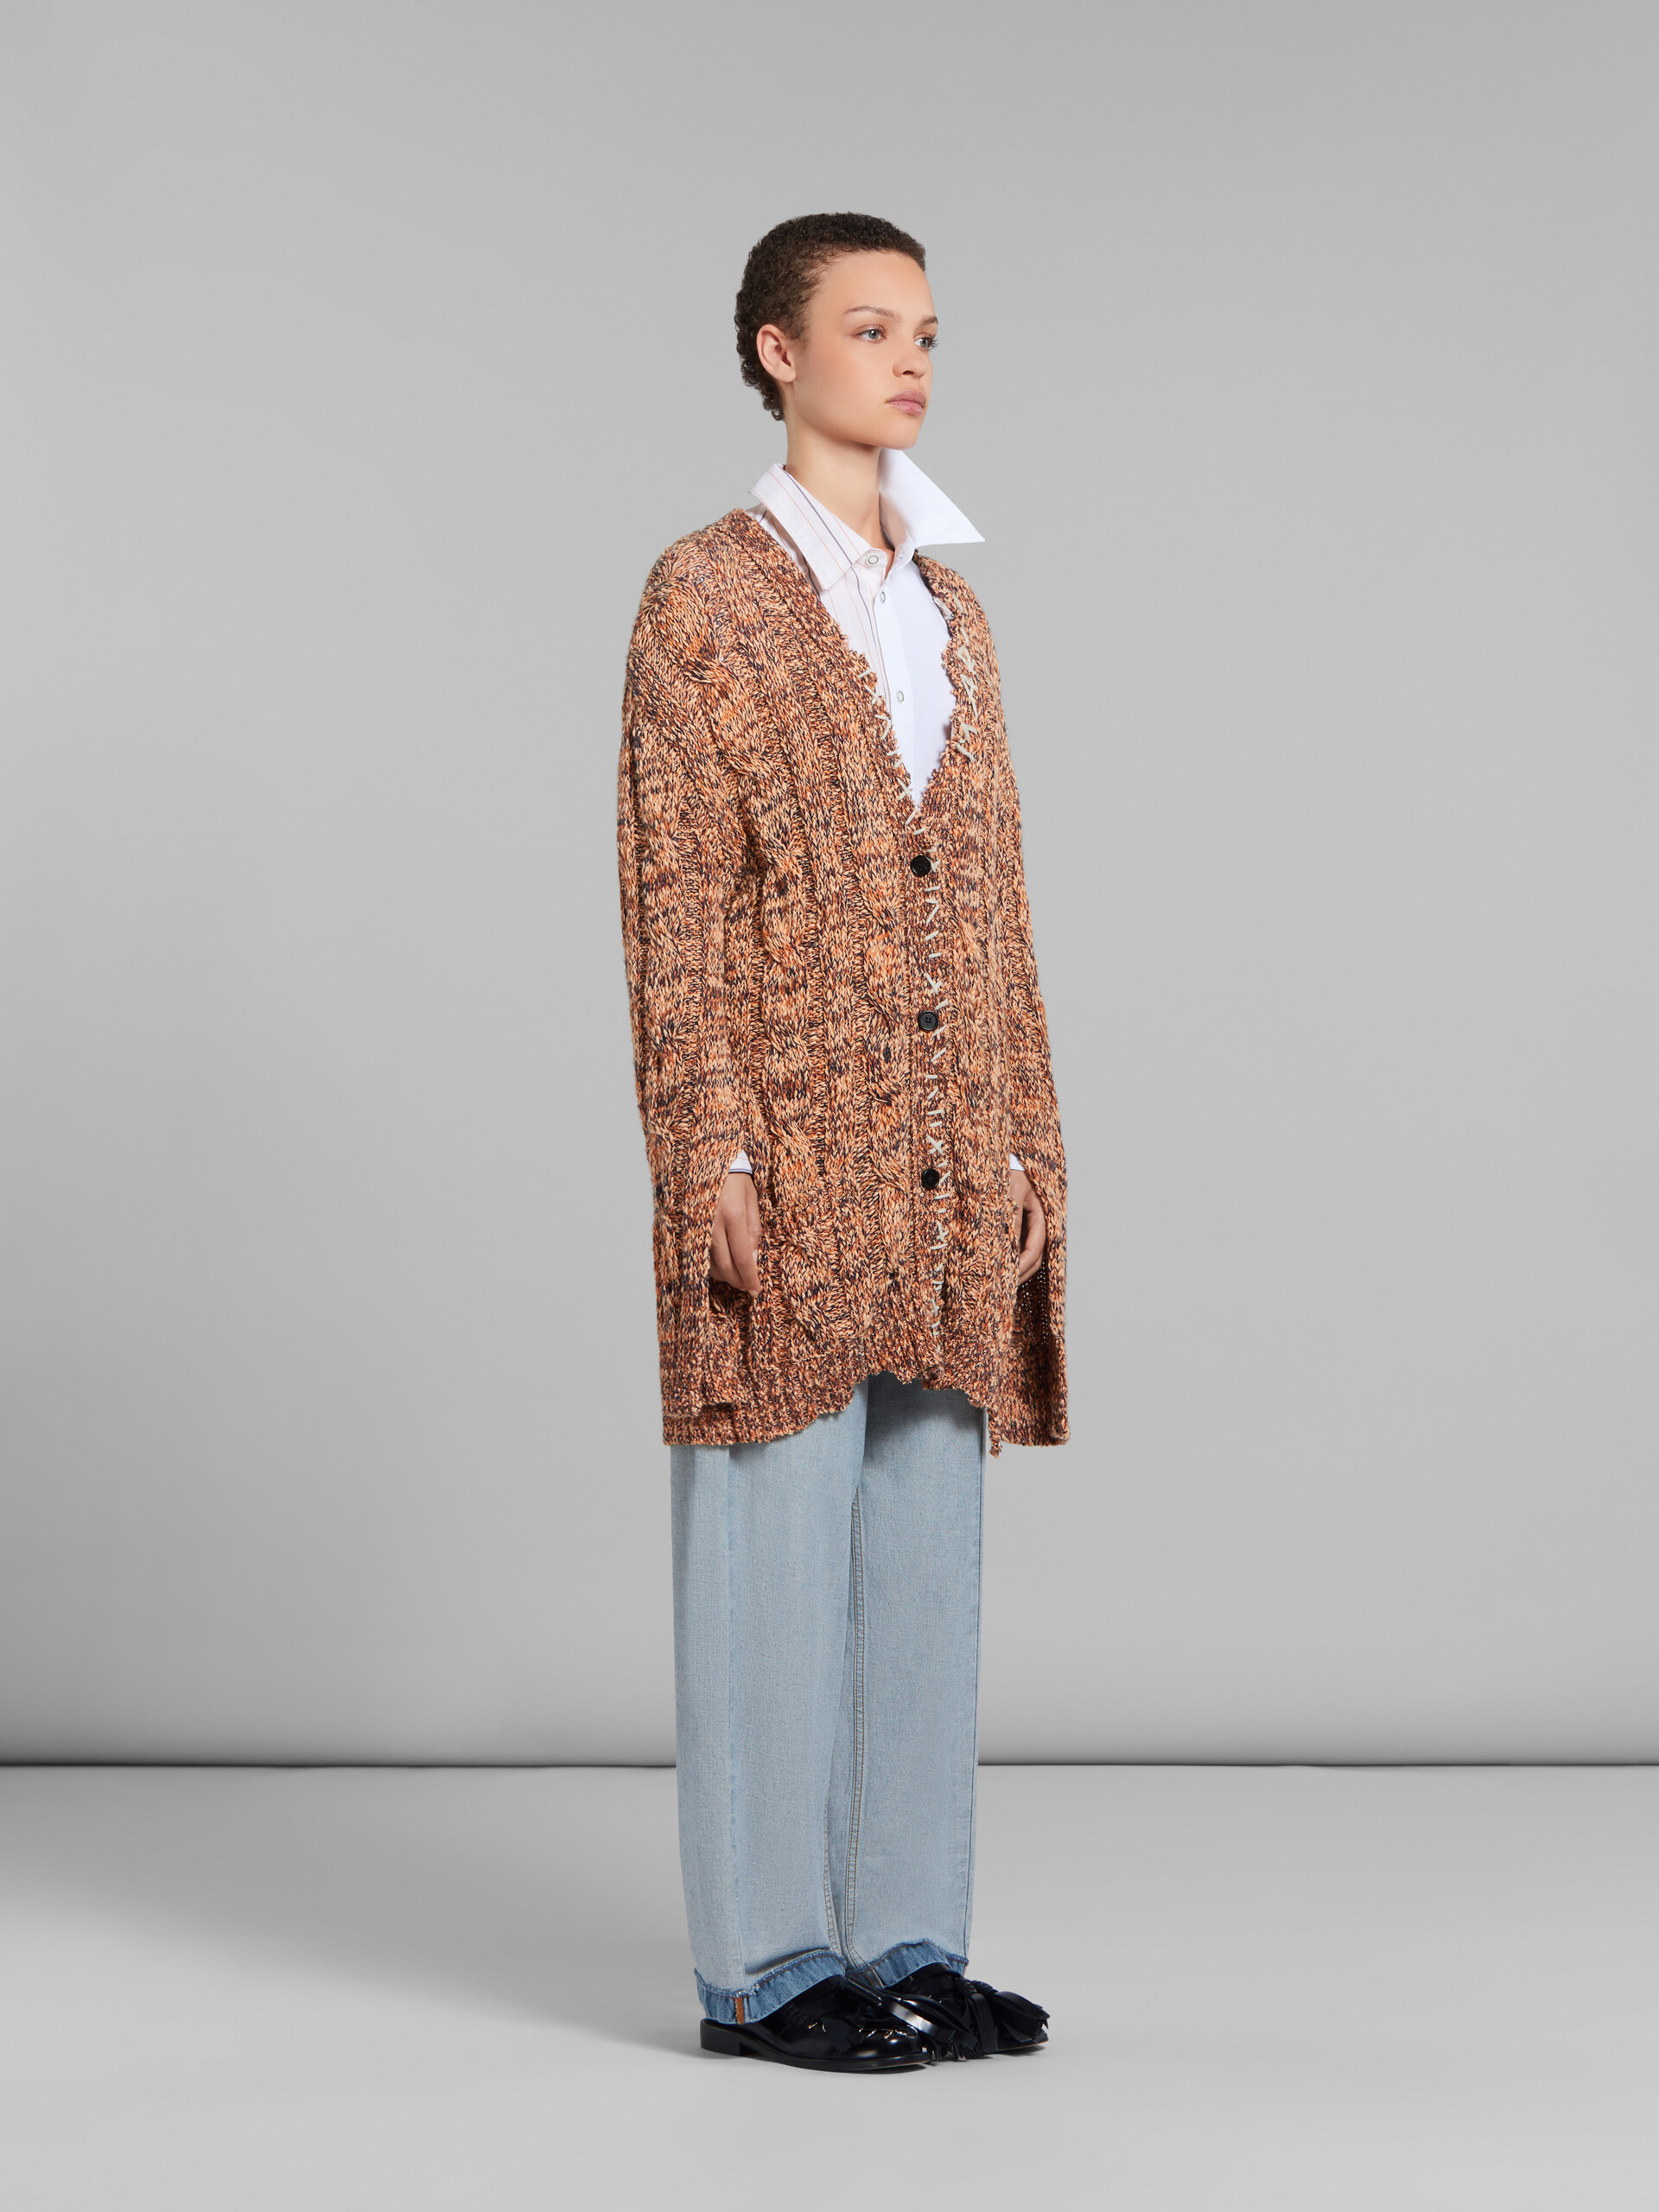 Orange mouliné cardigan with Marni mending - Pullovers - Image 5